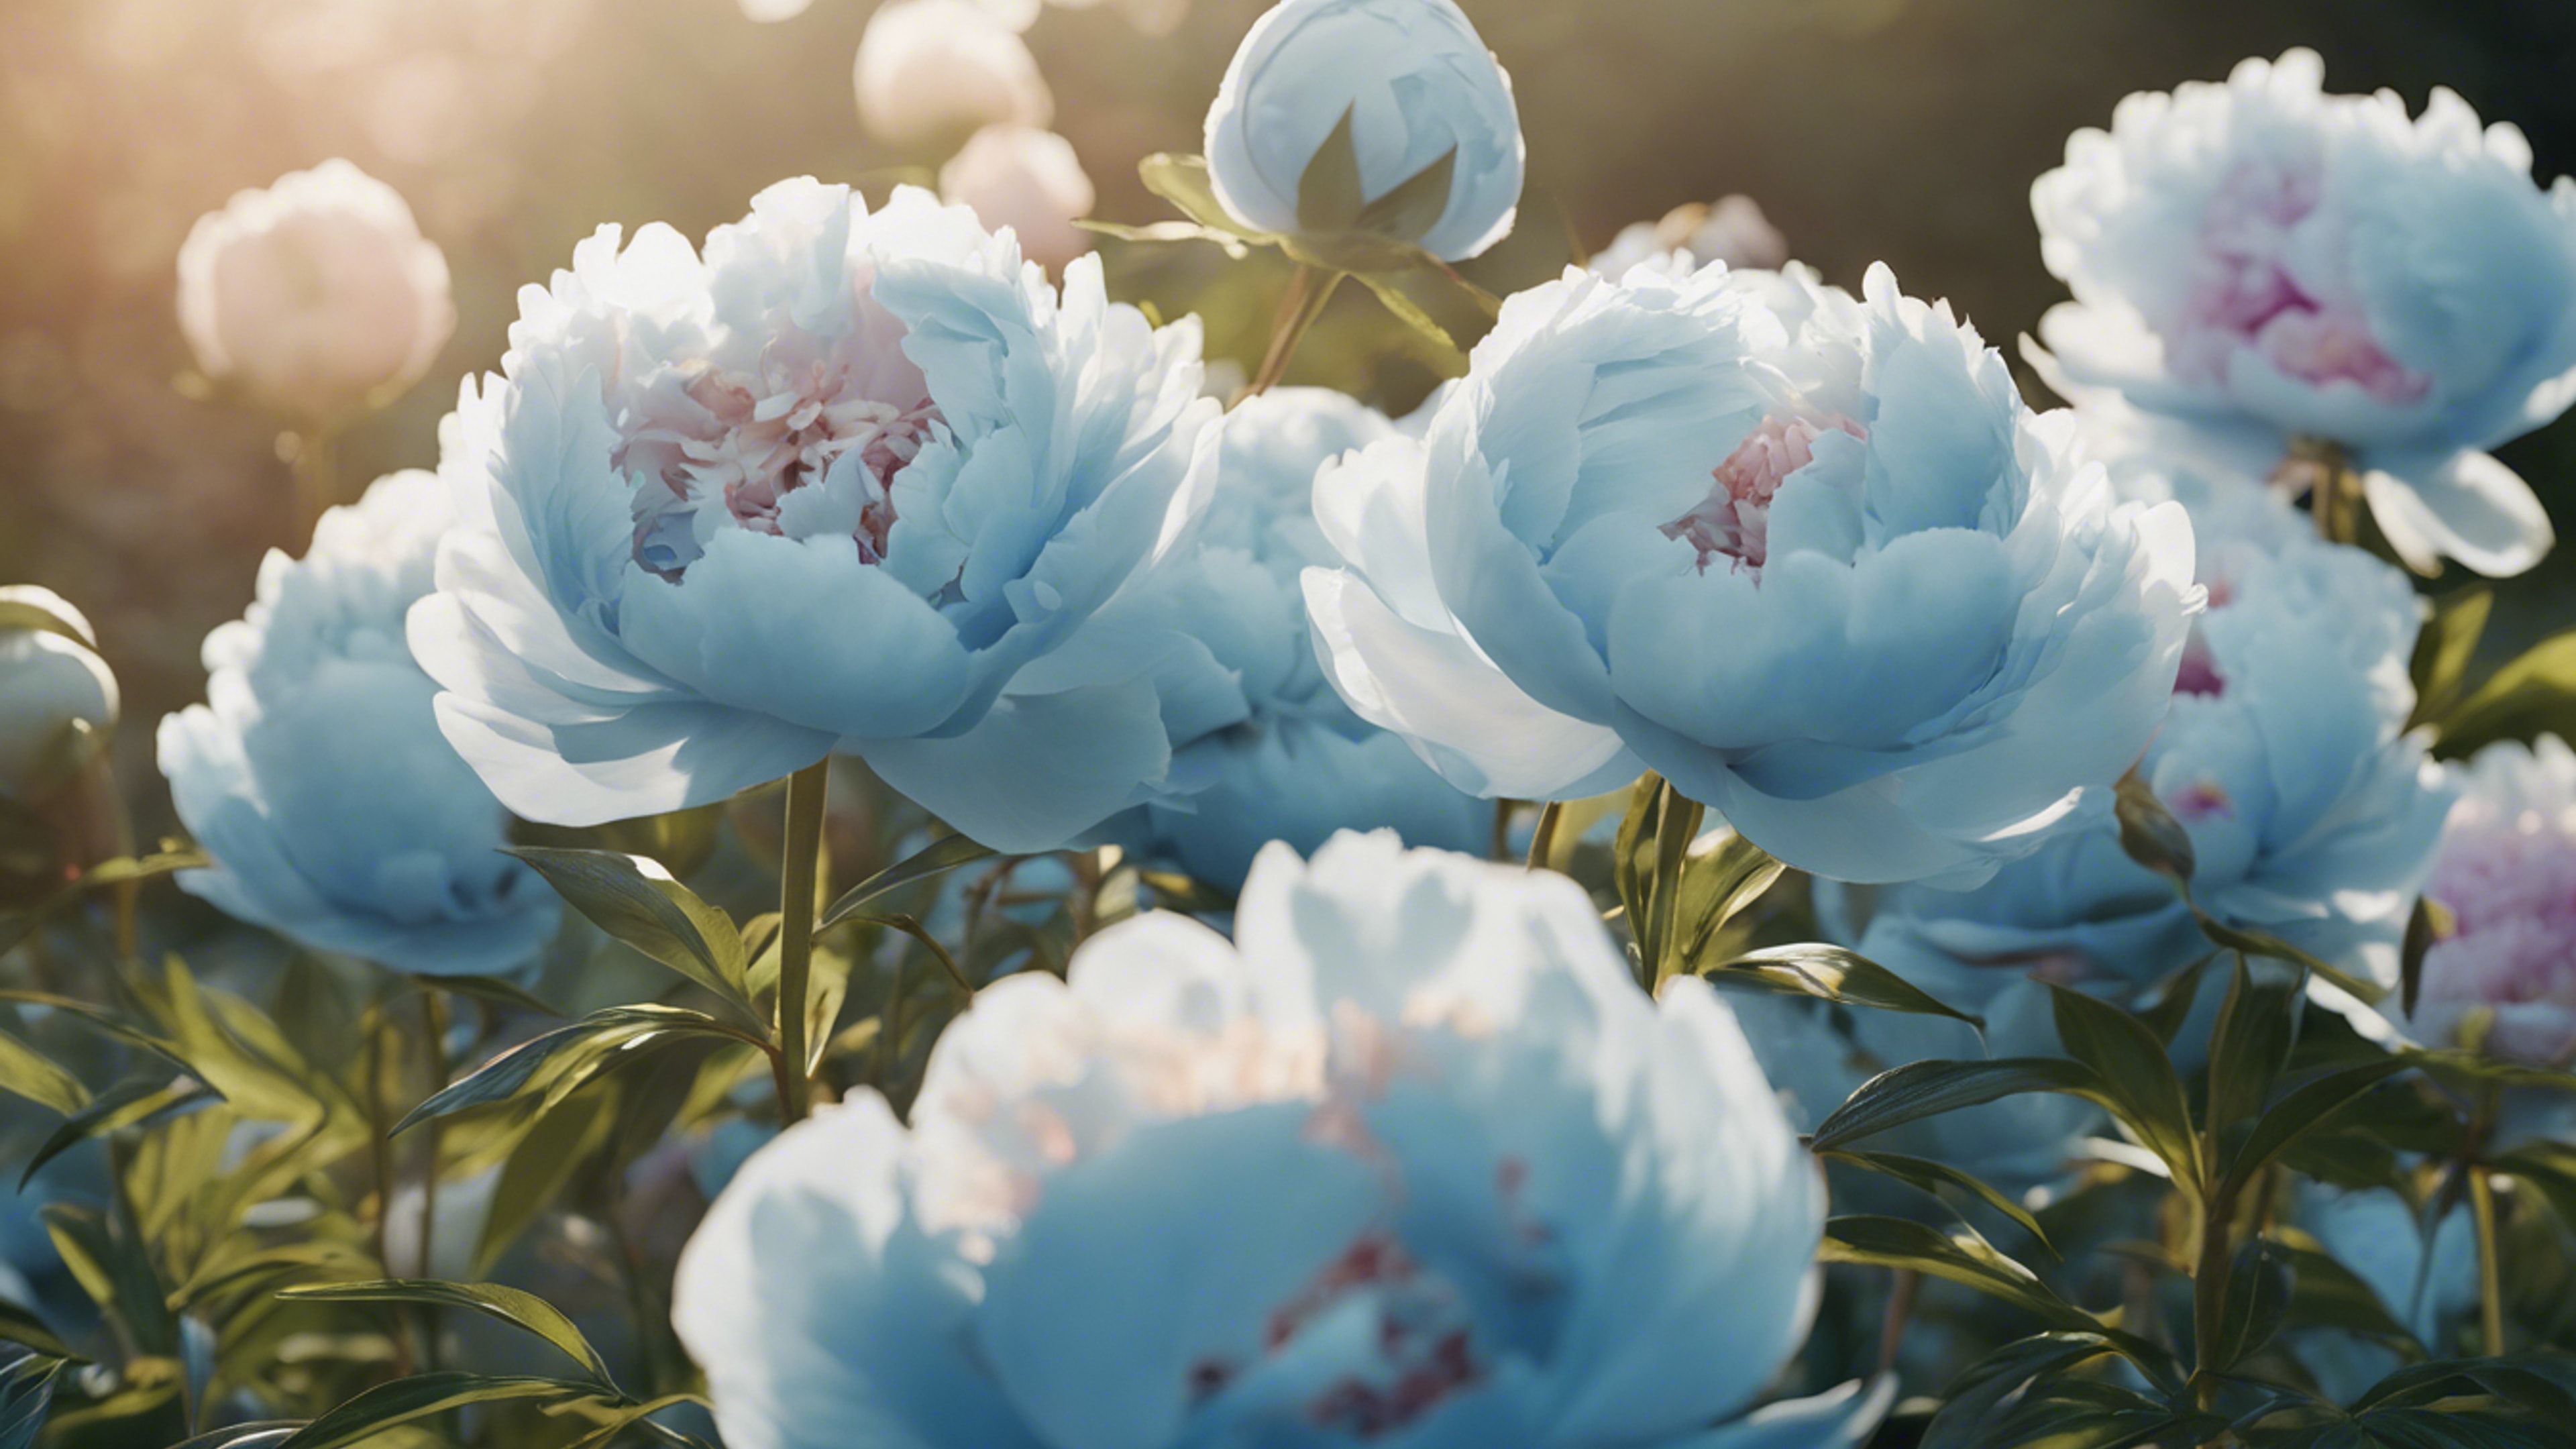 An array of pastel blue peonies blooming in a sunlit garden. Tapeta[bebed2869b0c4244859a]